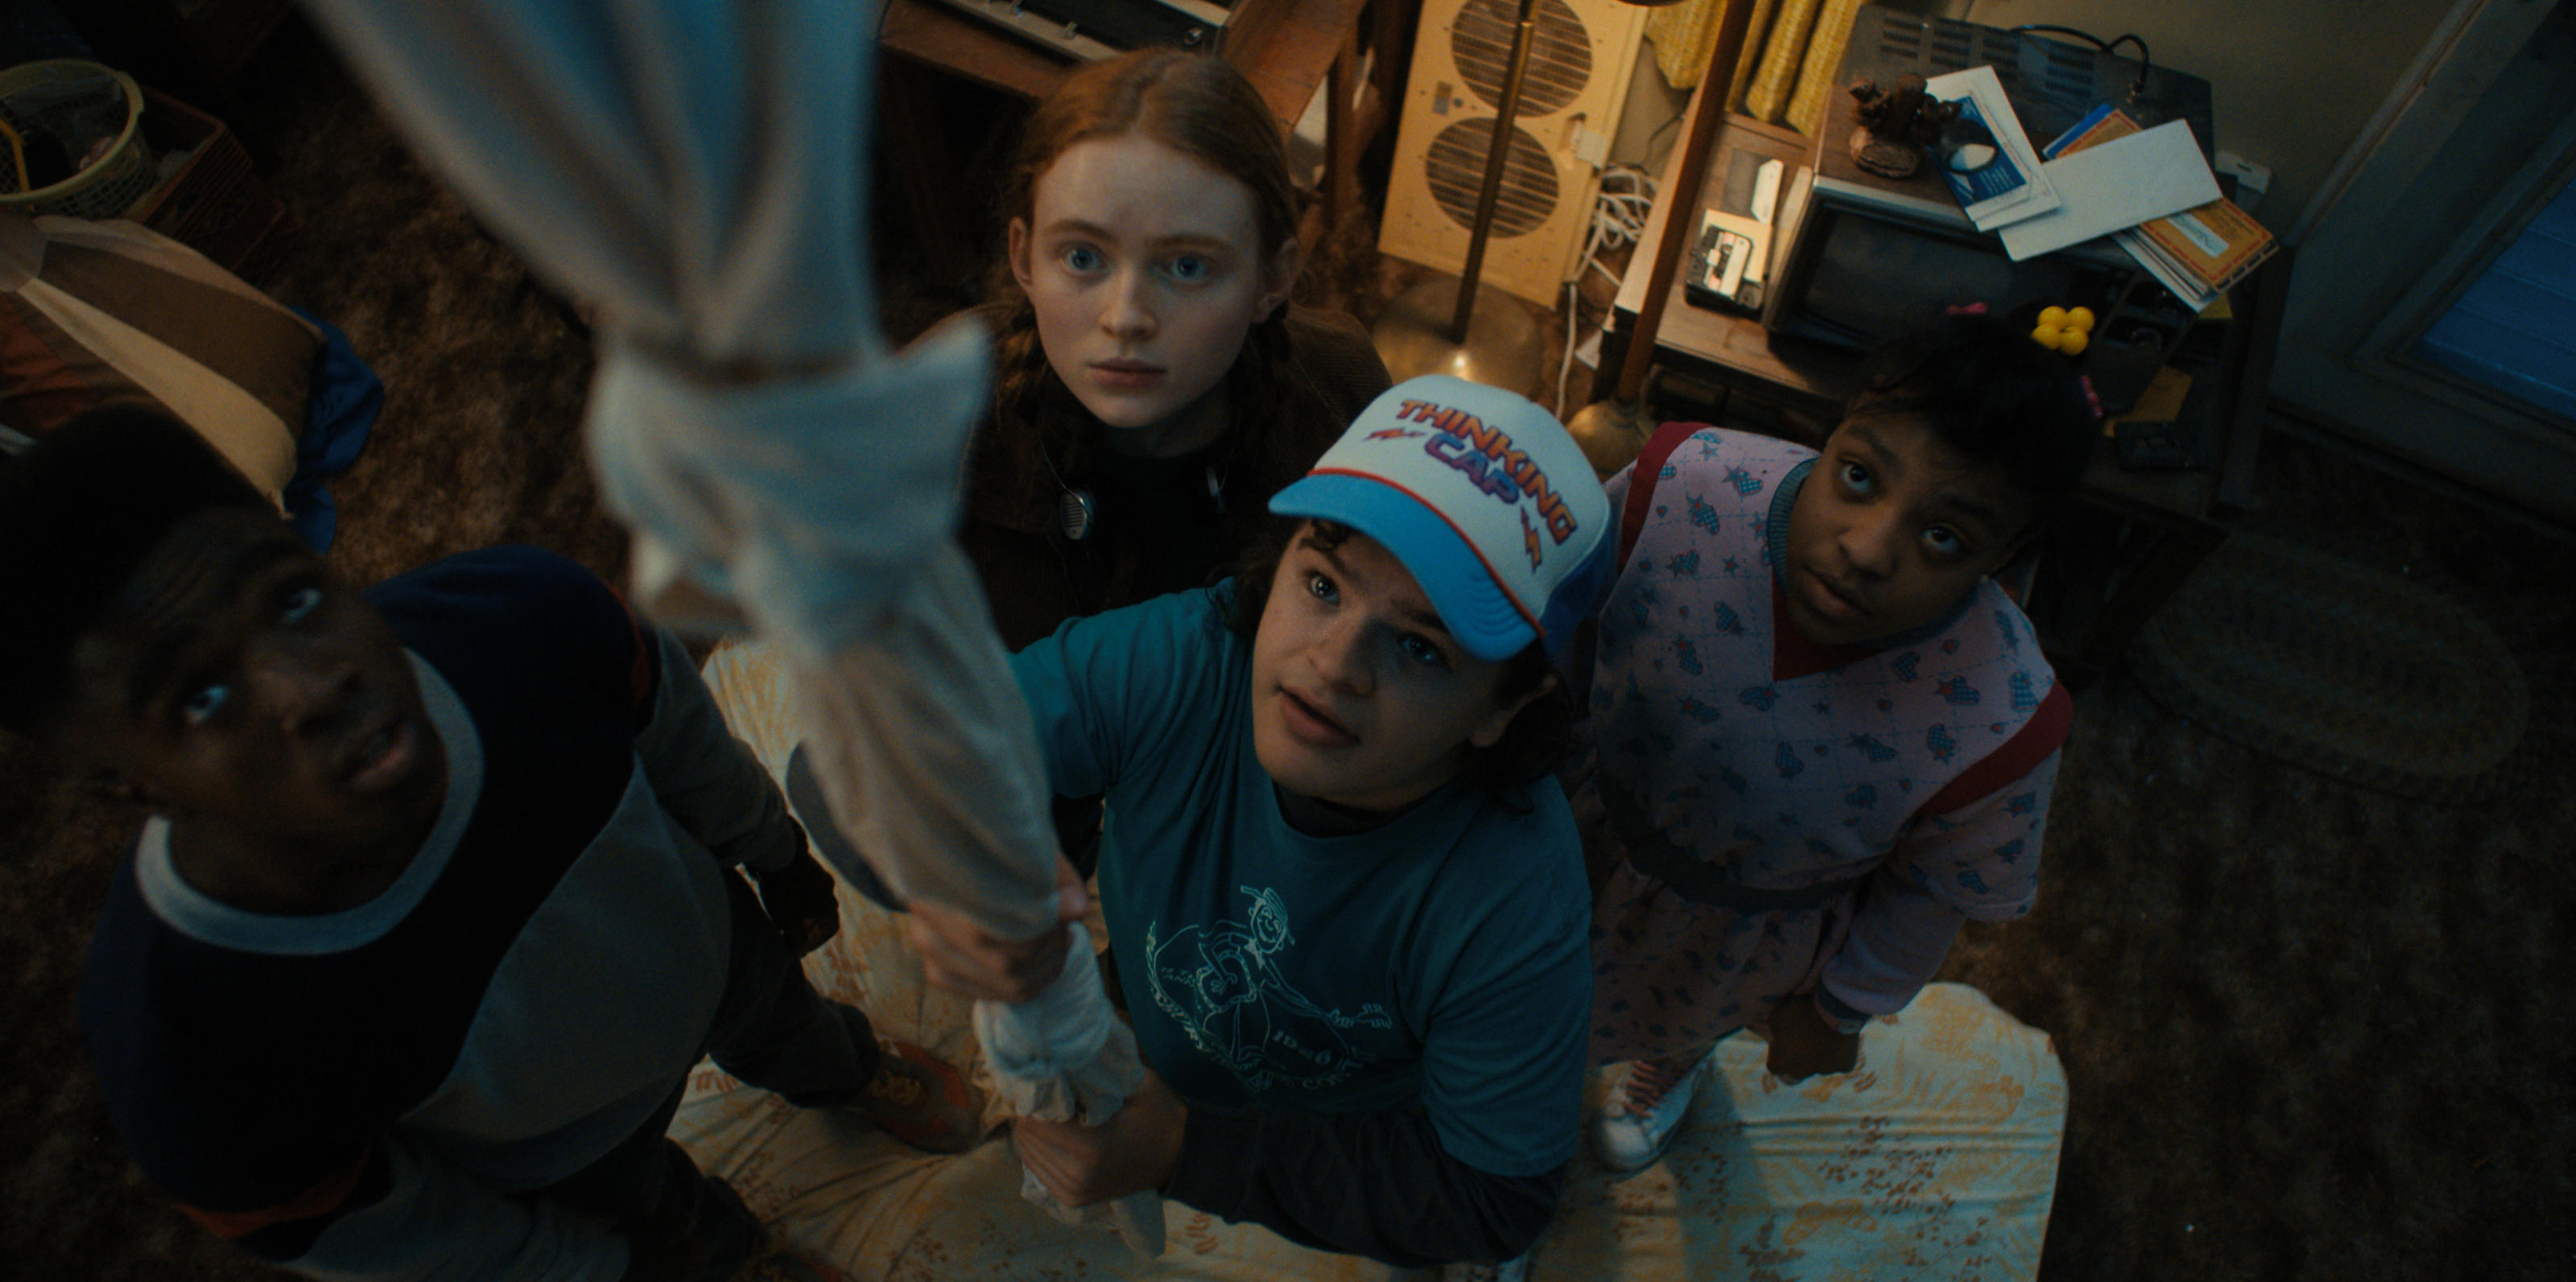 Stranger Things season 5 is now being written, but Netflix cancels